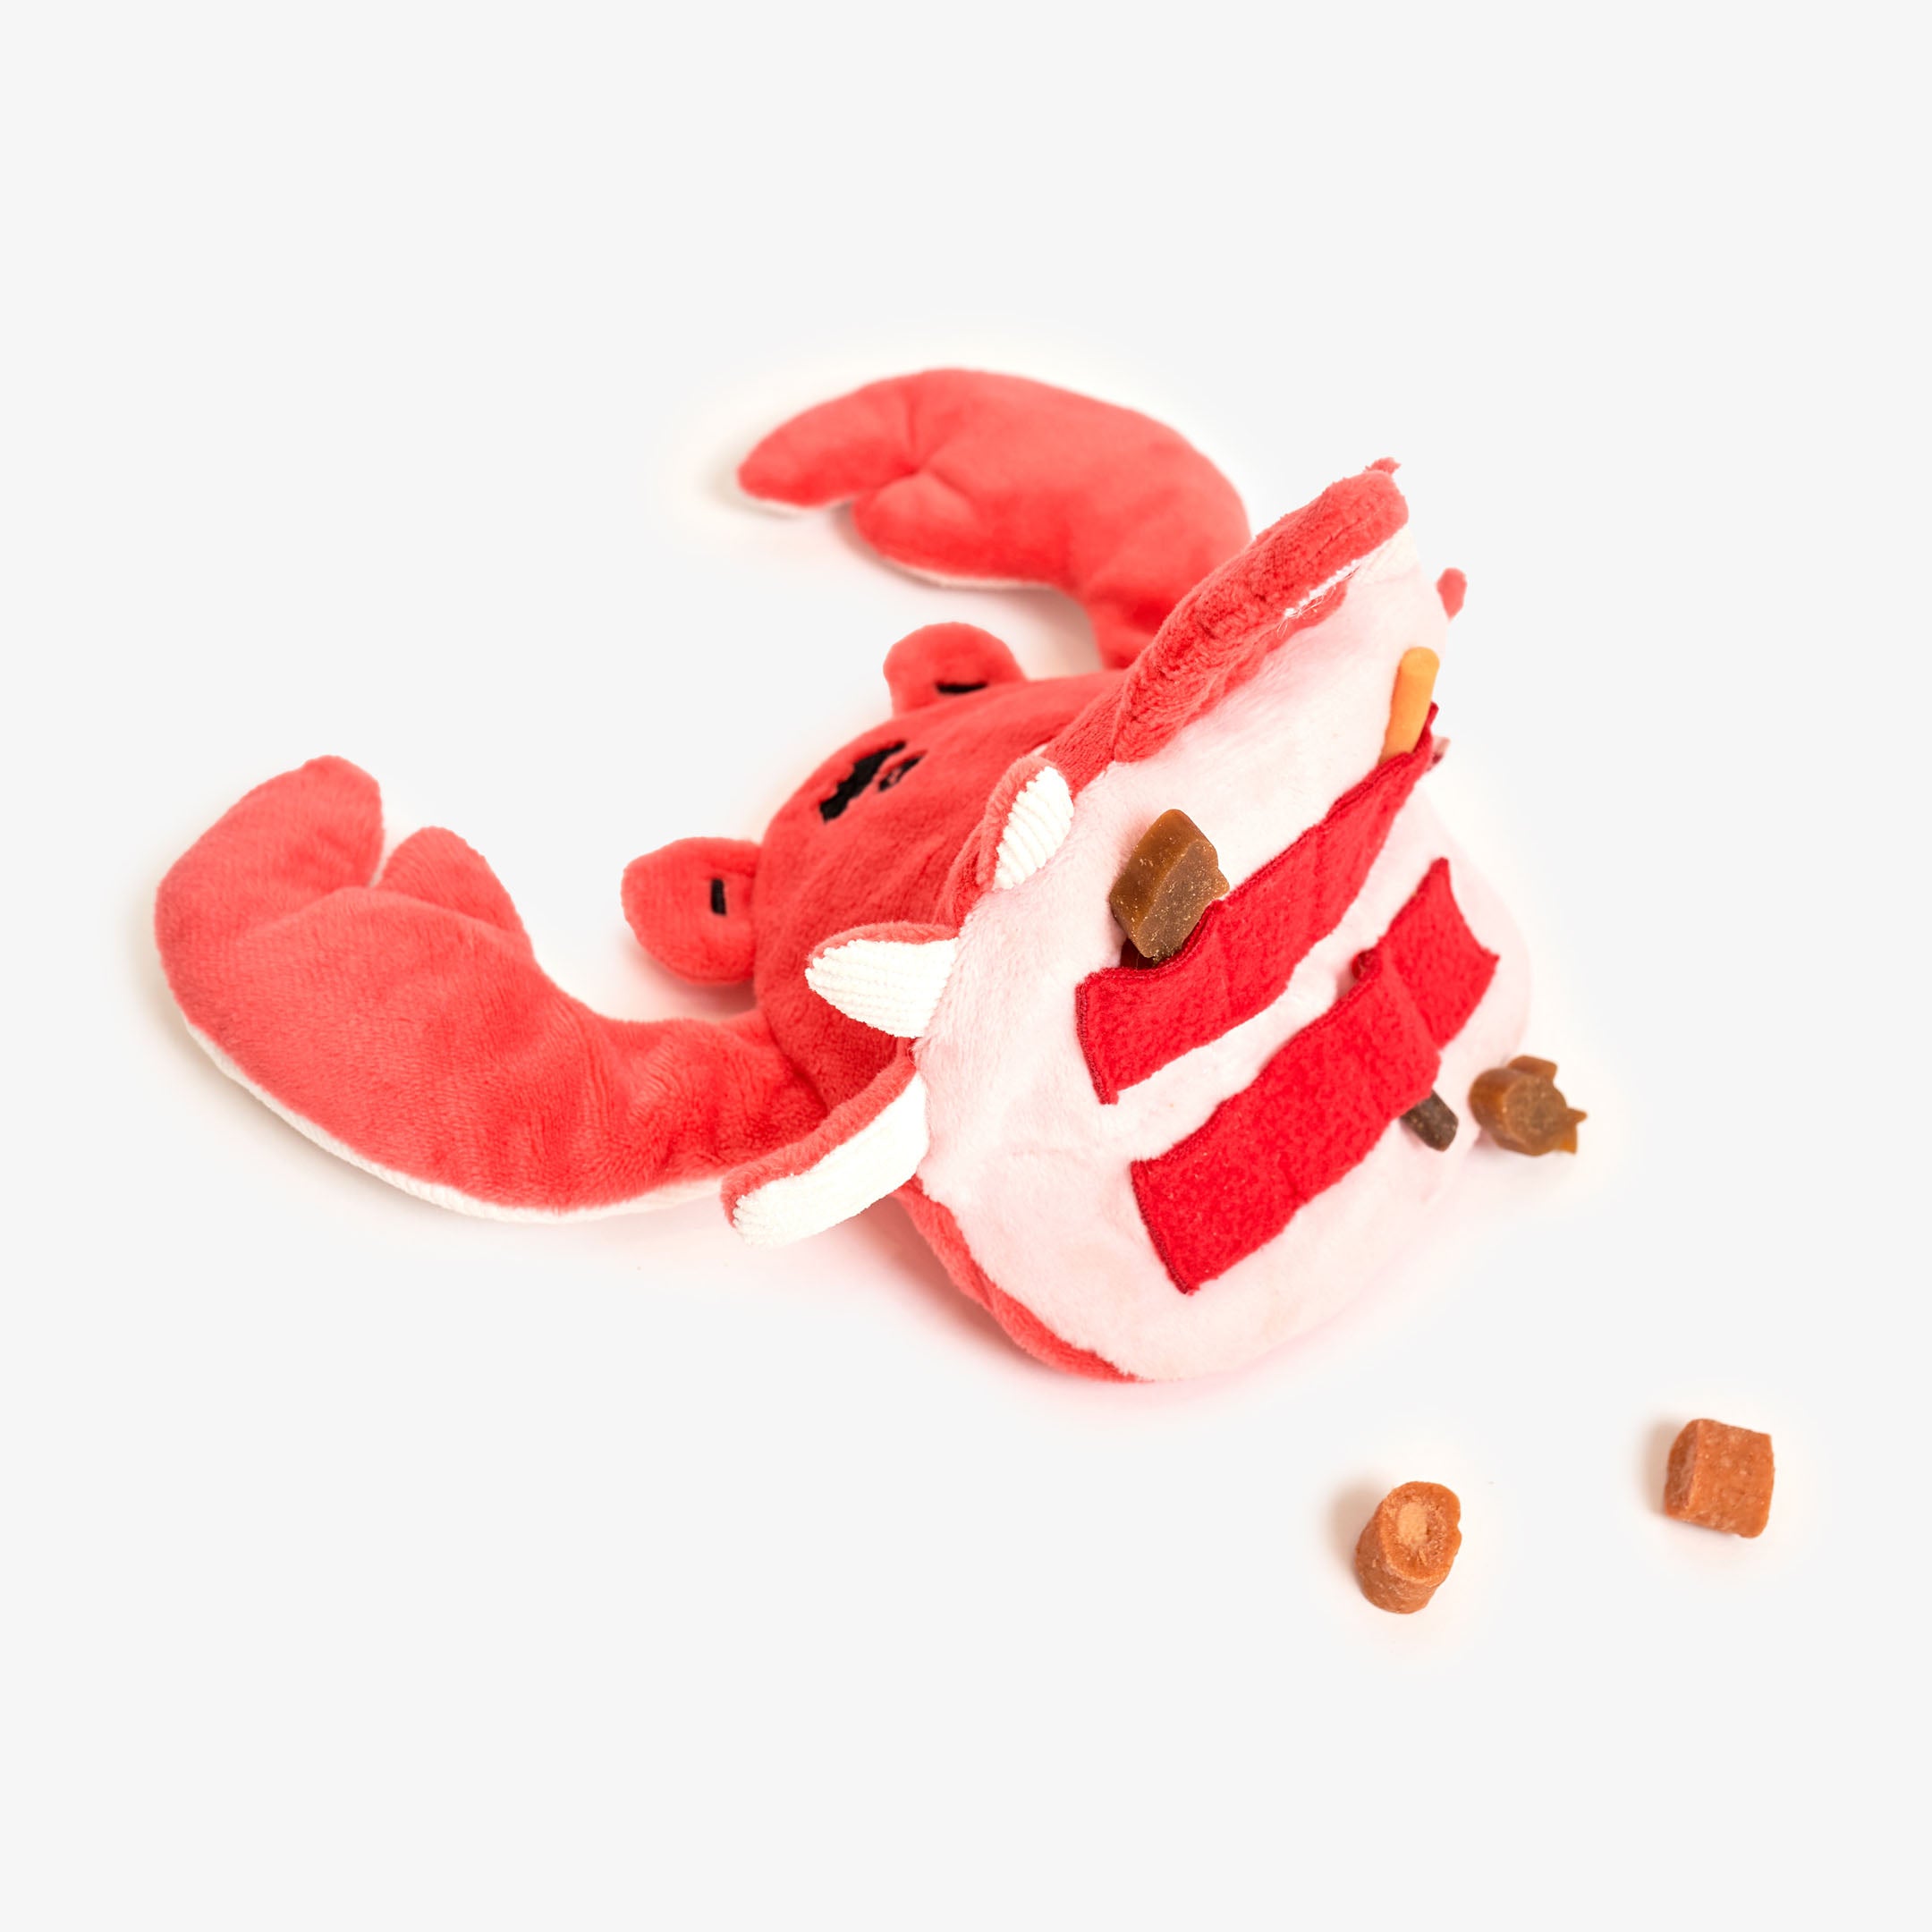 This image shows a red plush crab toy with compartments holding dog treats, an interactive design meant to entertain pets by challenging them to retrieve the snacks.